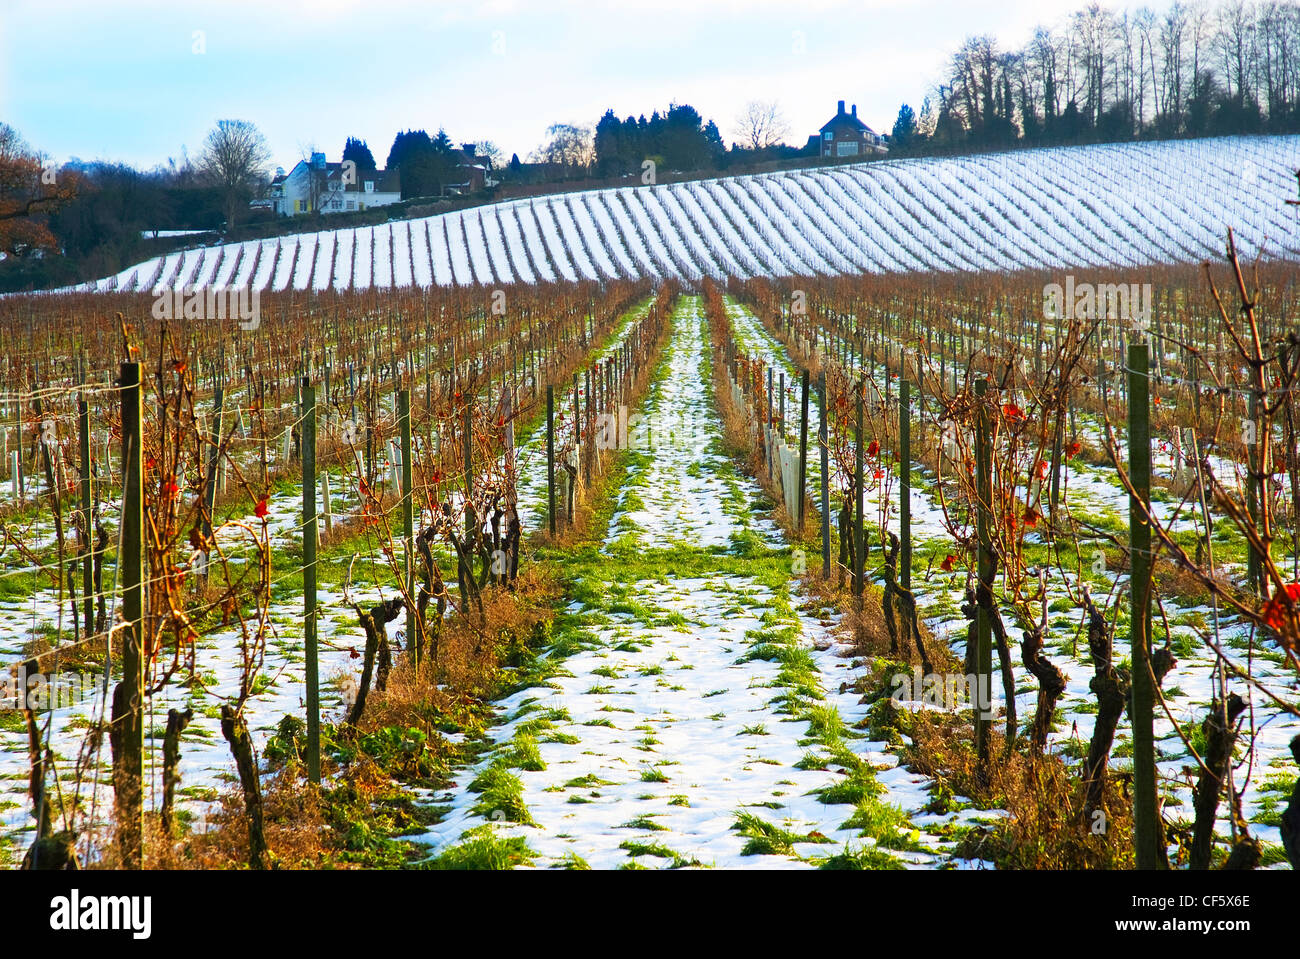 Snow on the ground at Denbies English Vineyard in winter. Stock Photo